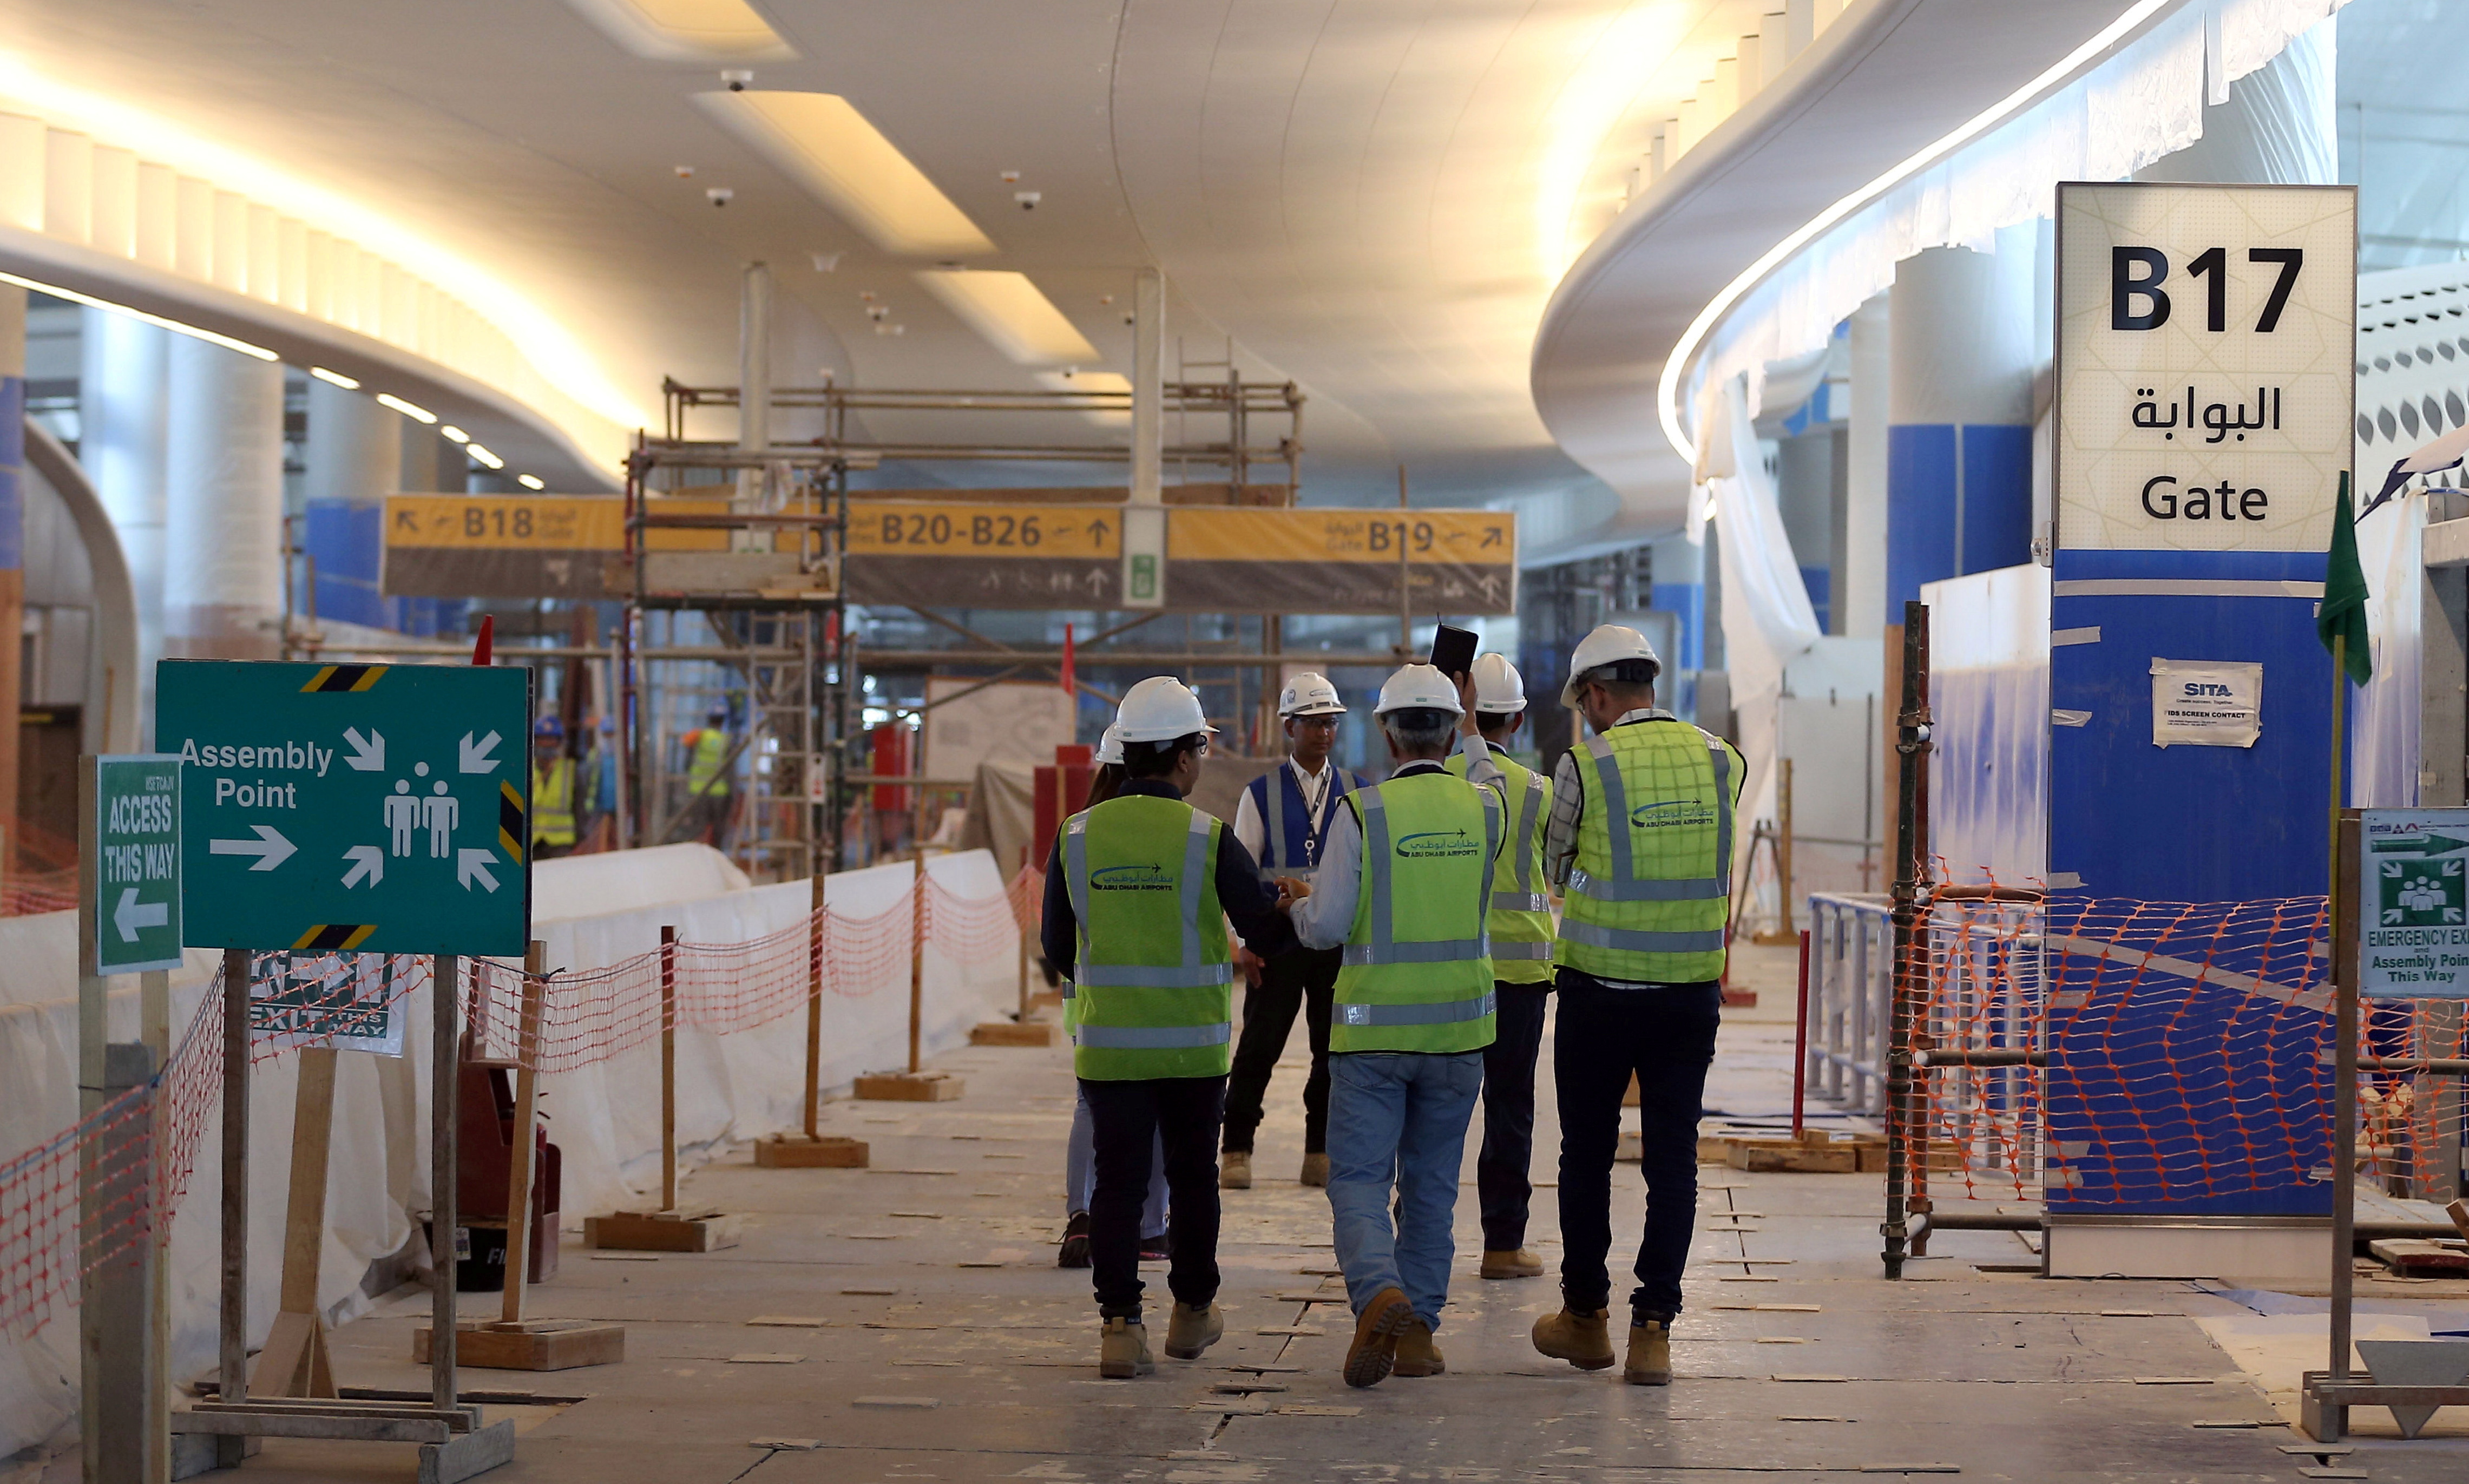 Visitors tour the construction site of the midfield terminal of Abu Dhabi International Airport in Abu Dhabi